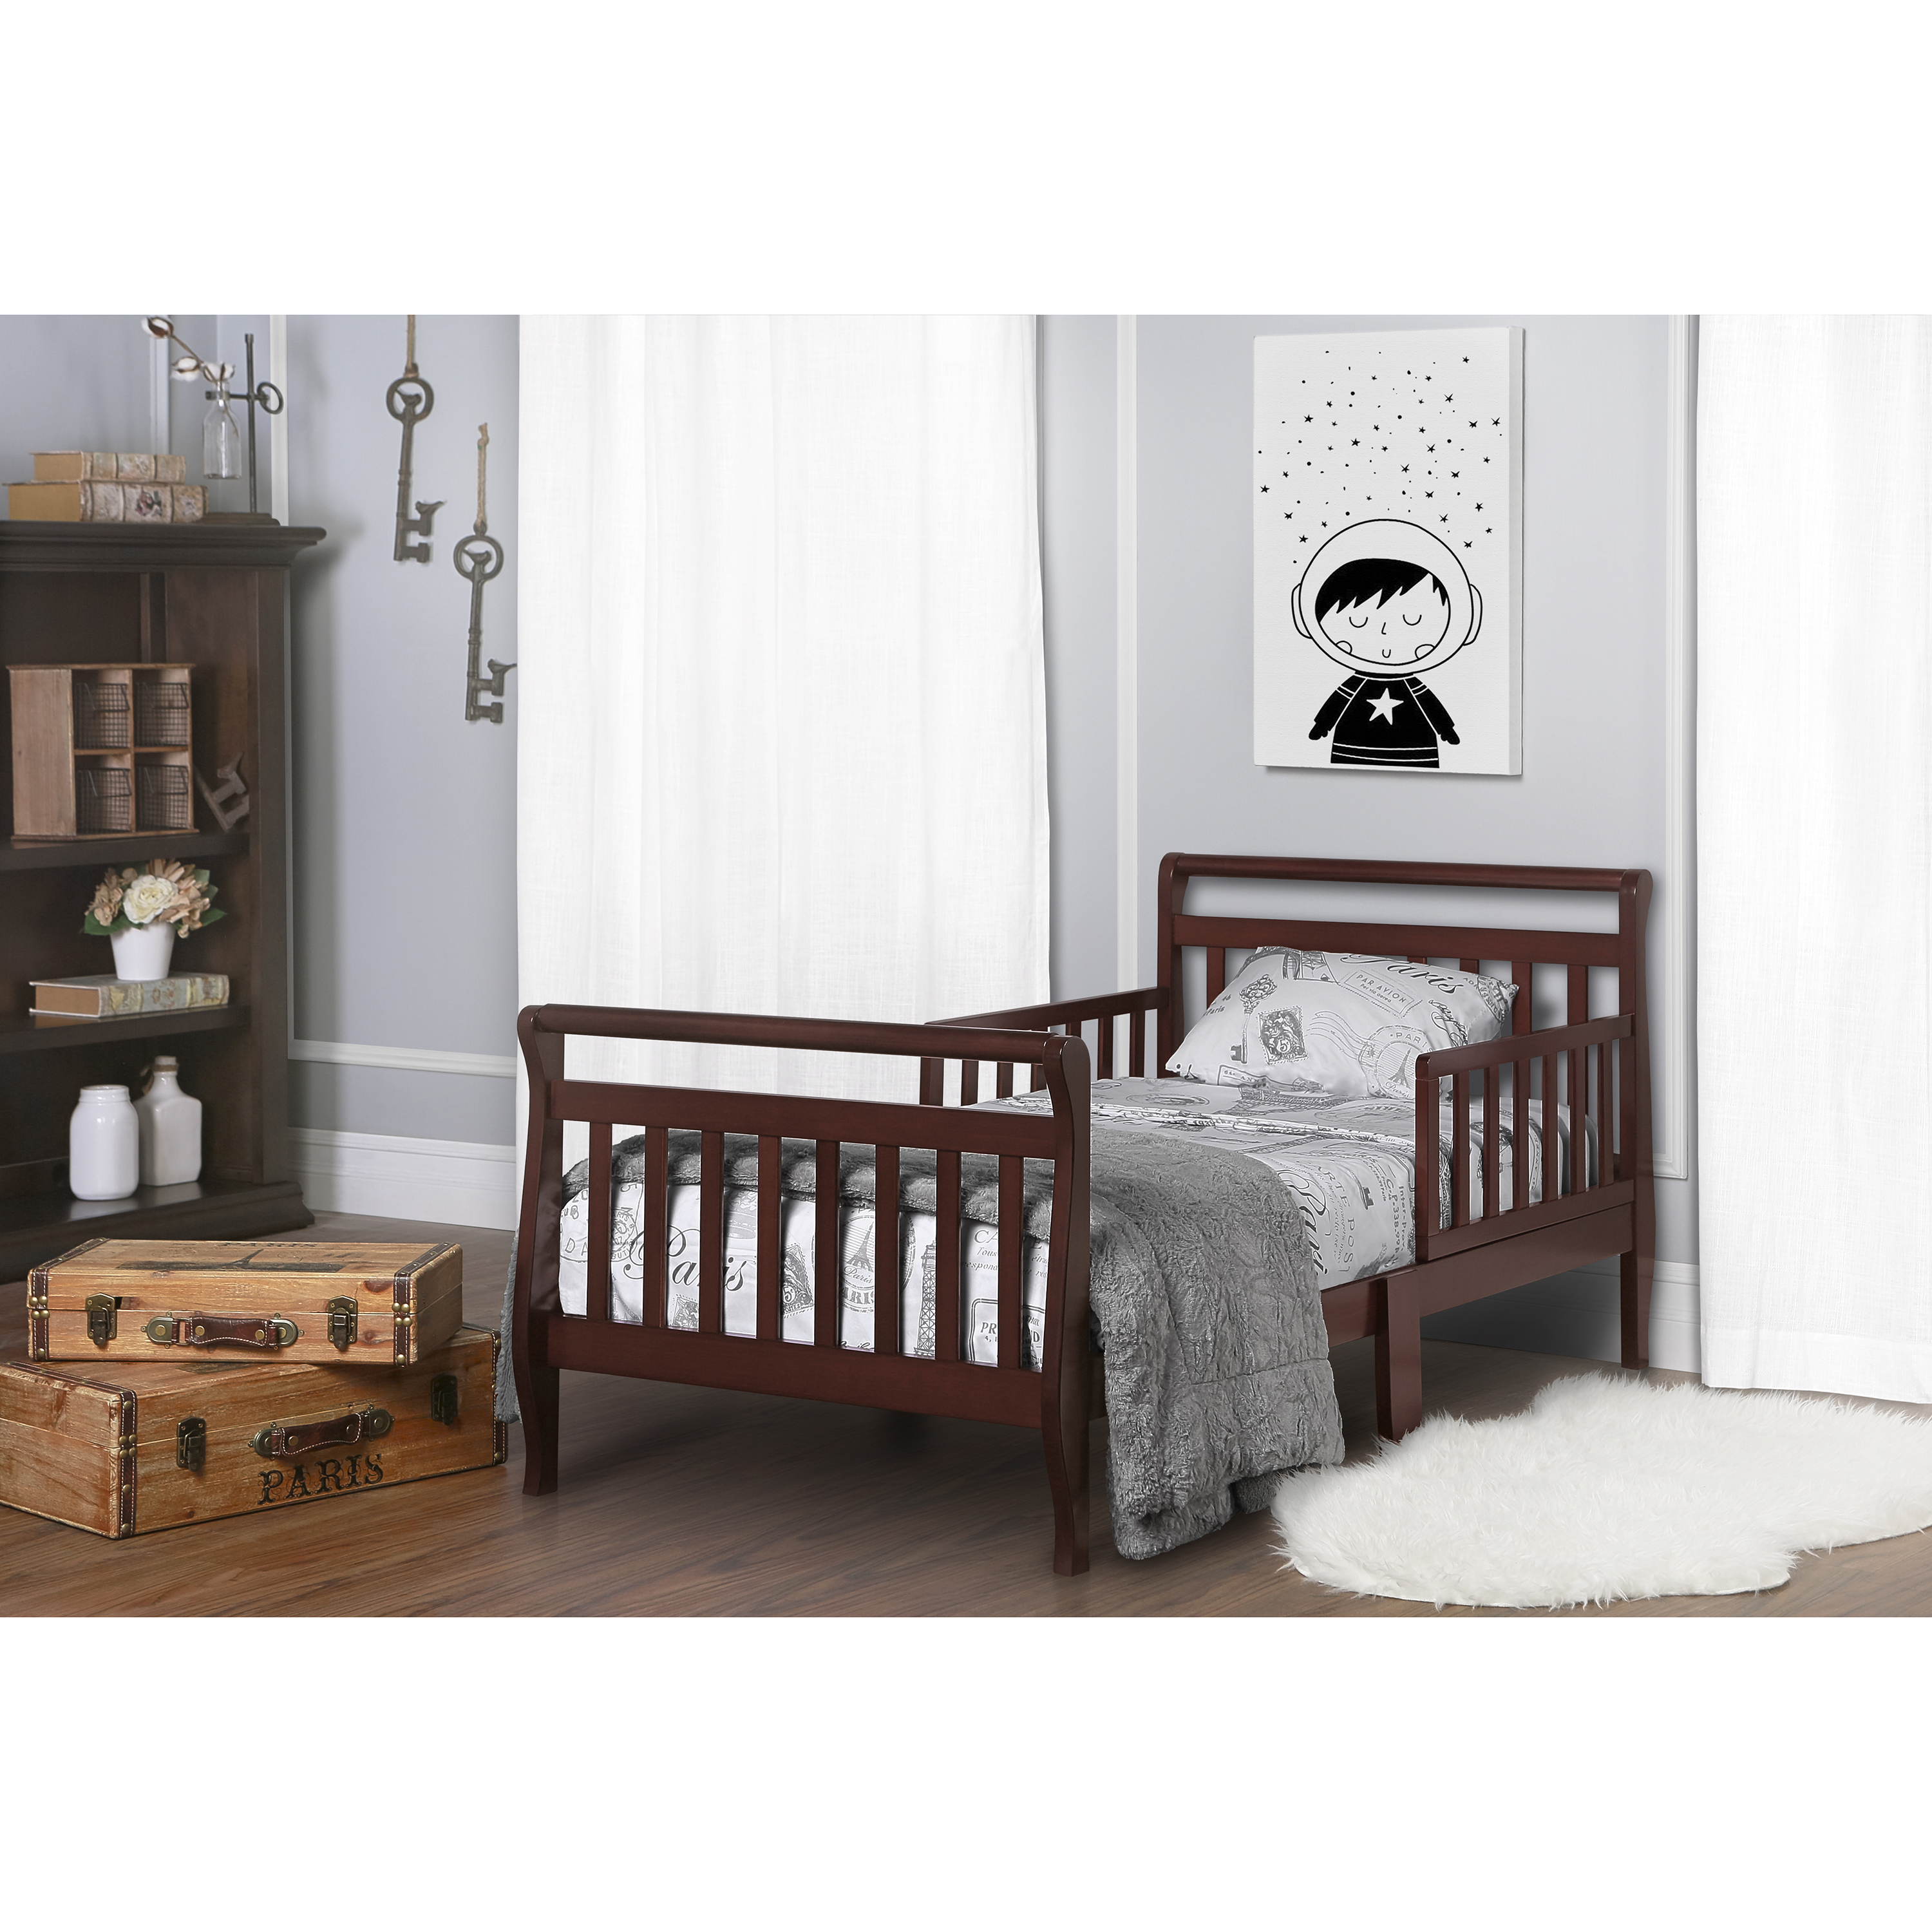 Dream On Me, Sleigh Toddler Bed, Cherry, Model #642-C - image 4 of 14